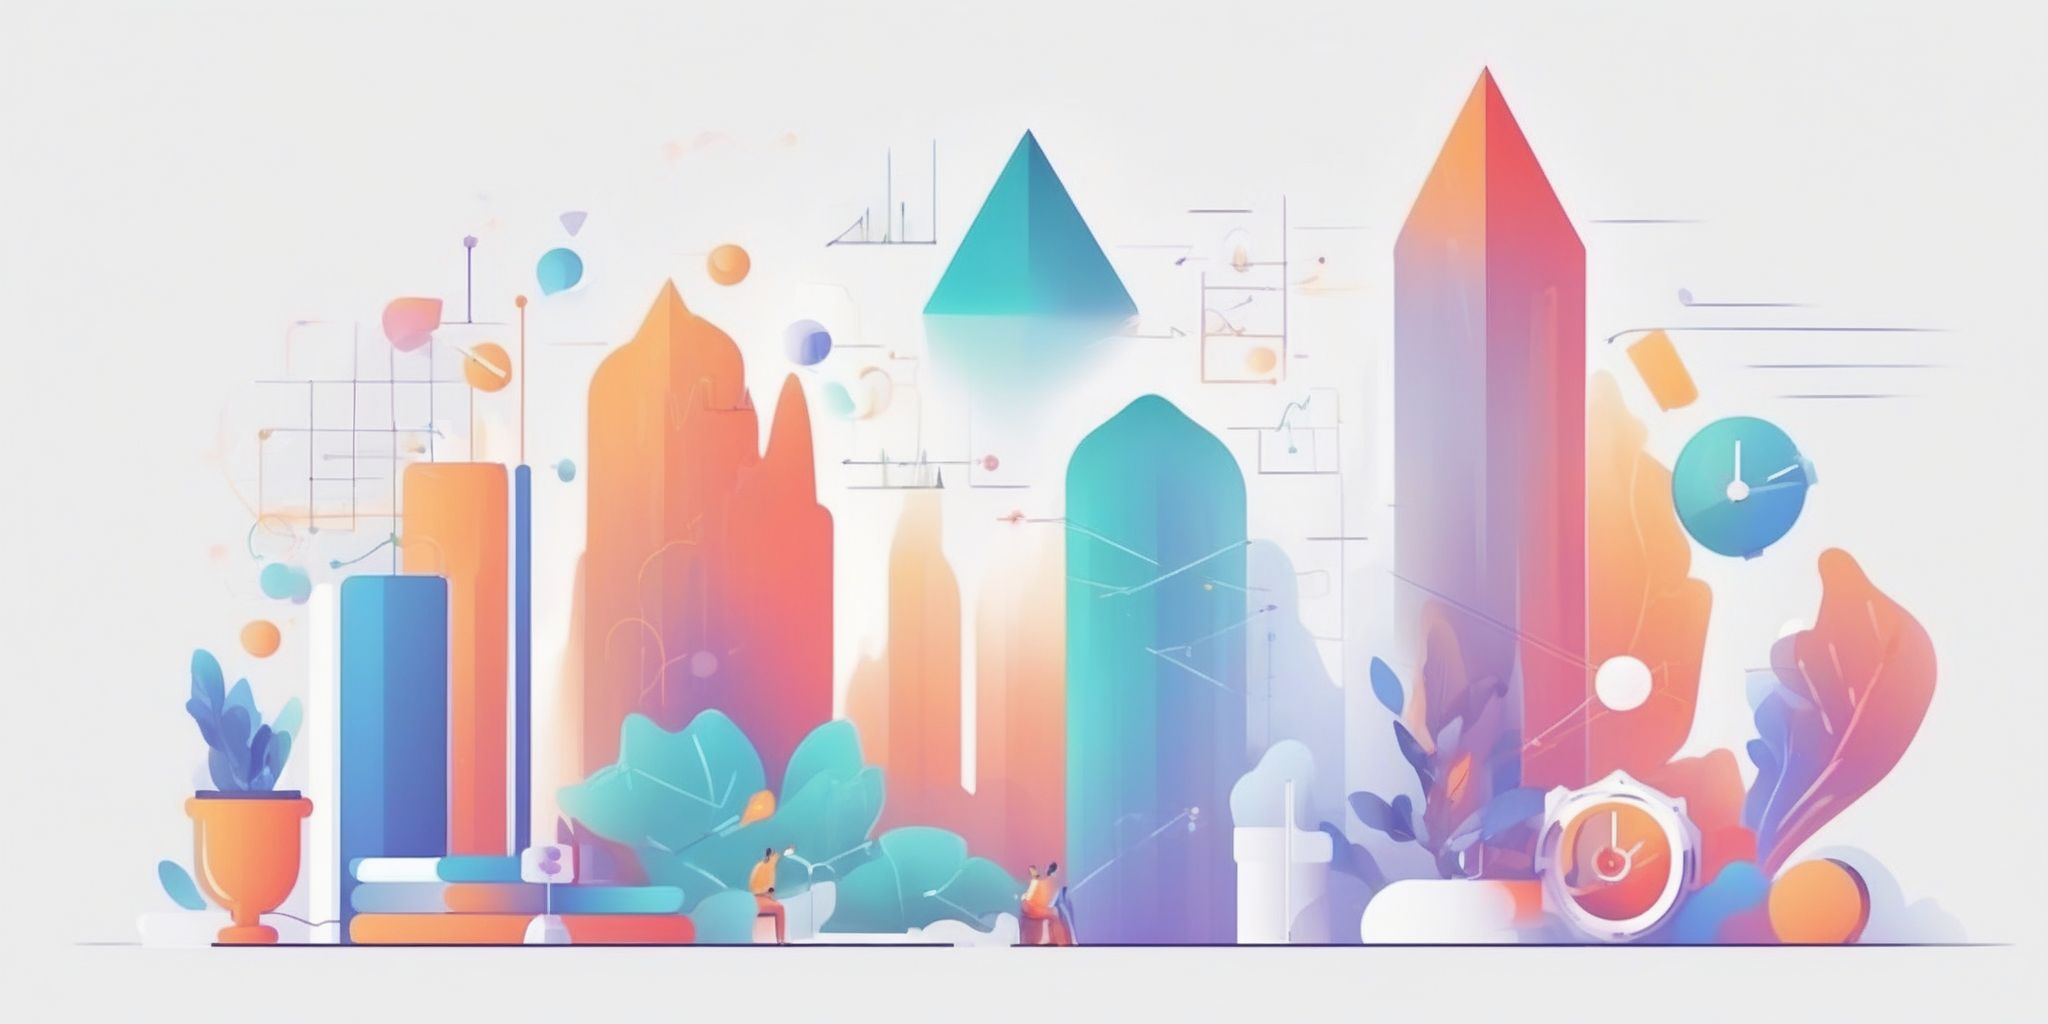 Strategy in illustration style with gradients and white background